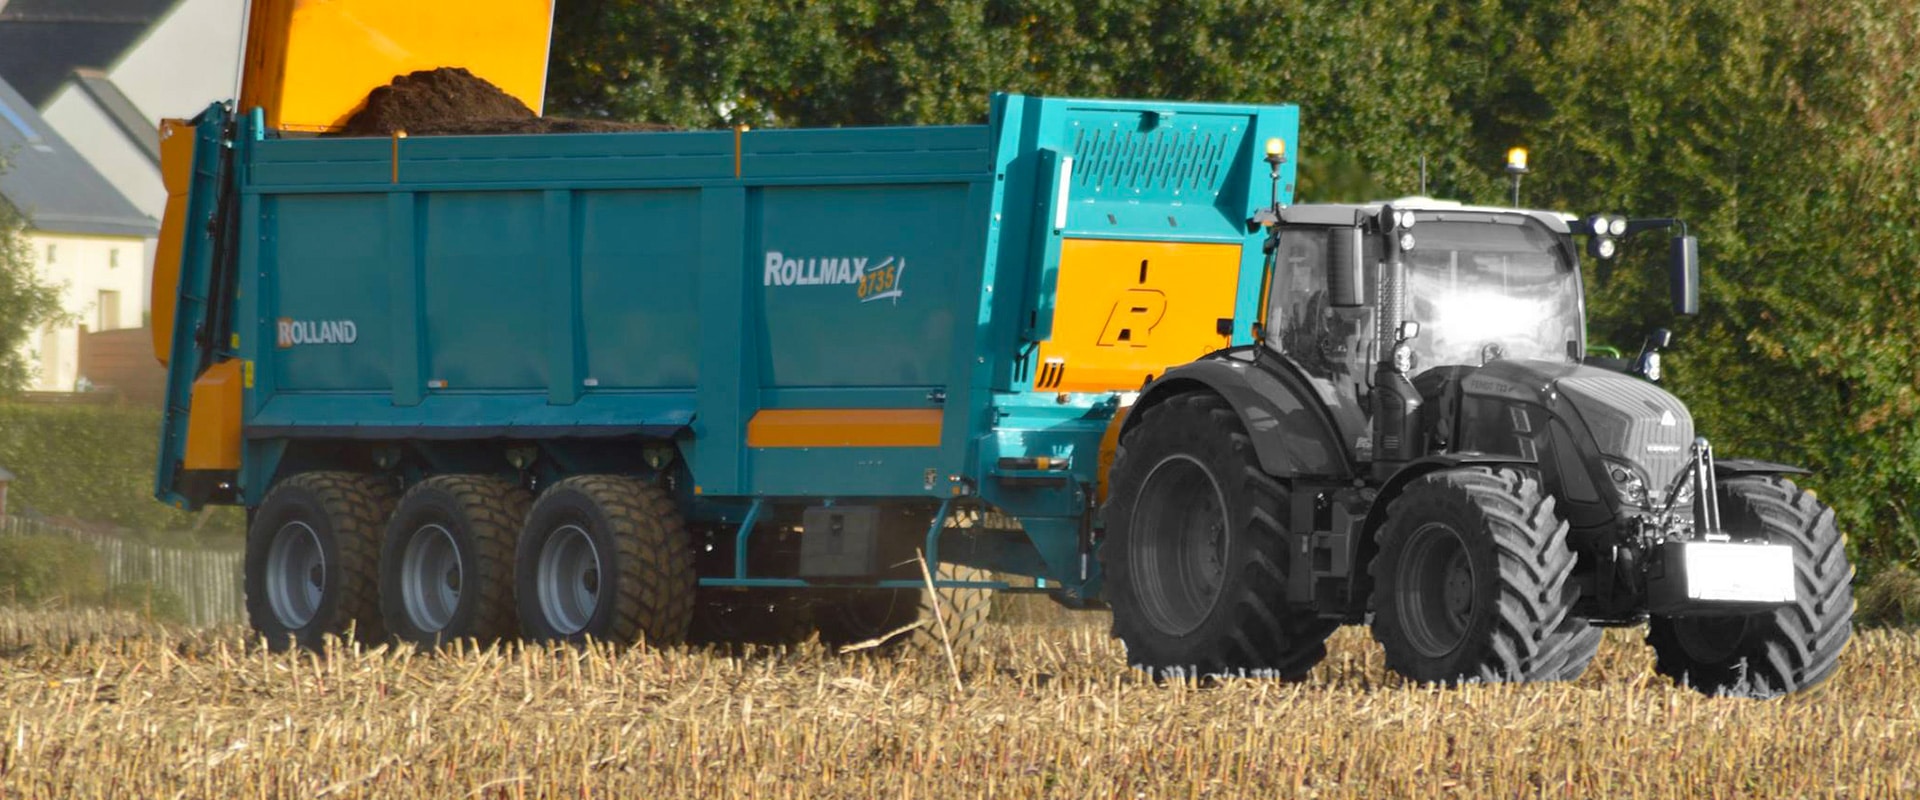 Rolland trailers